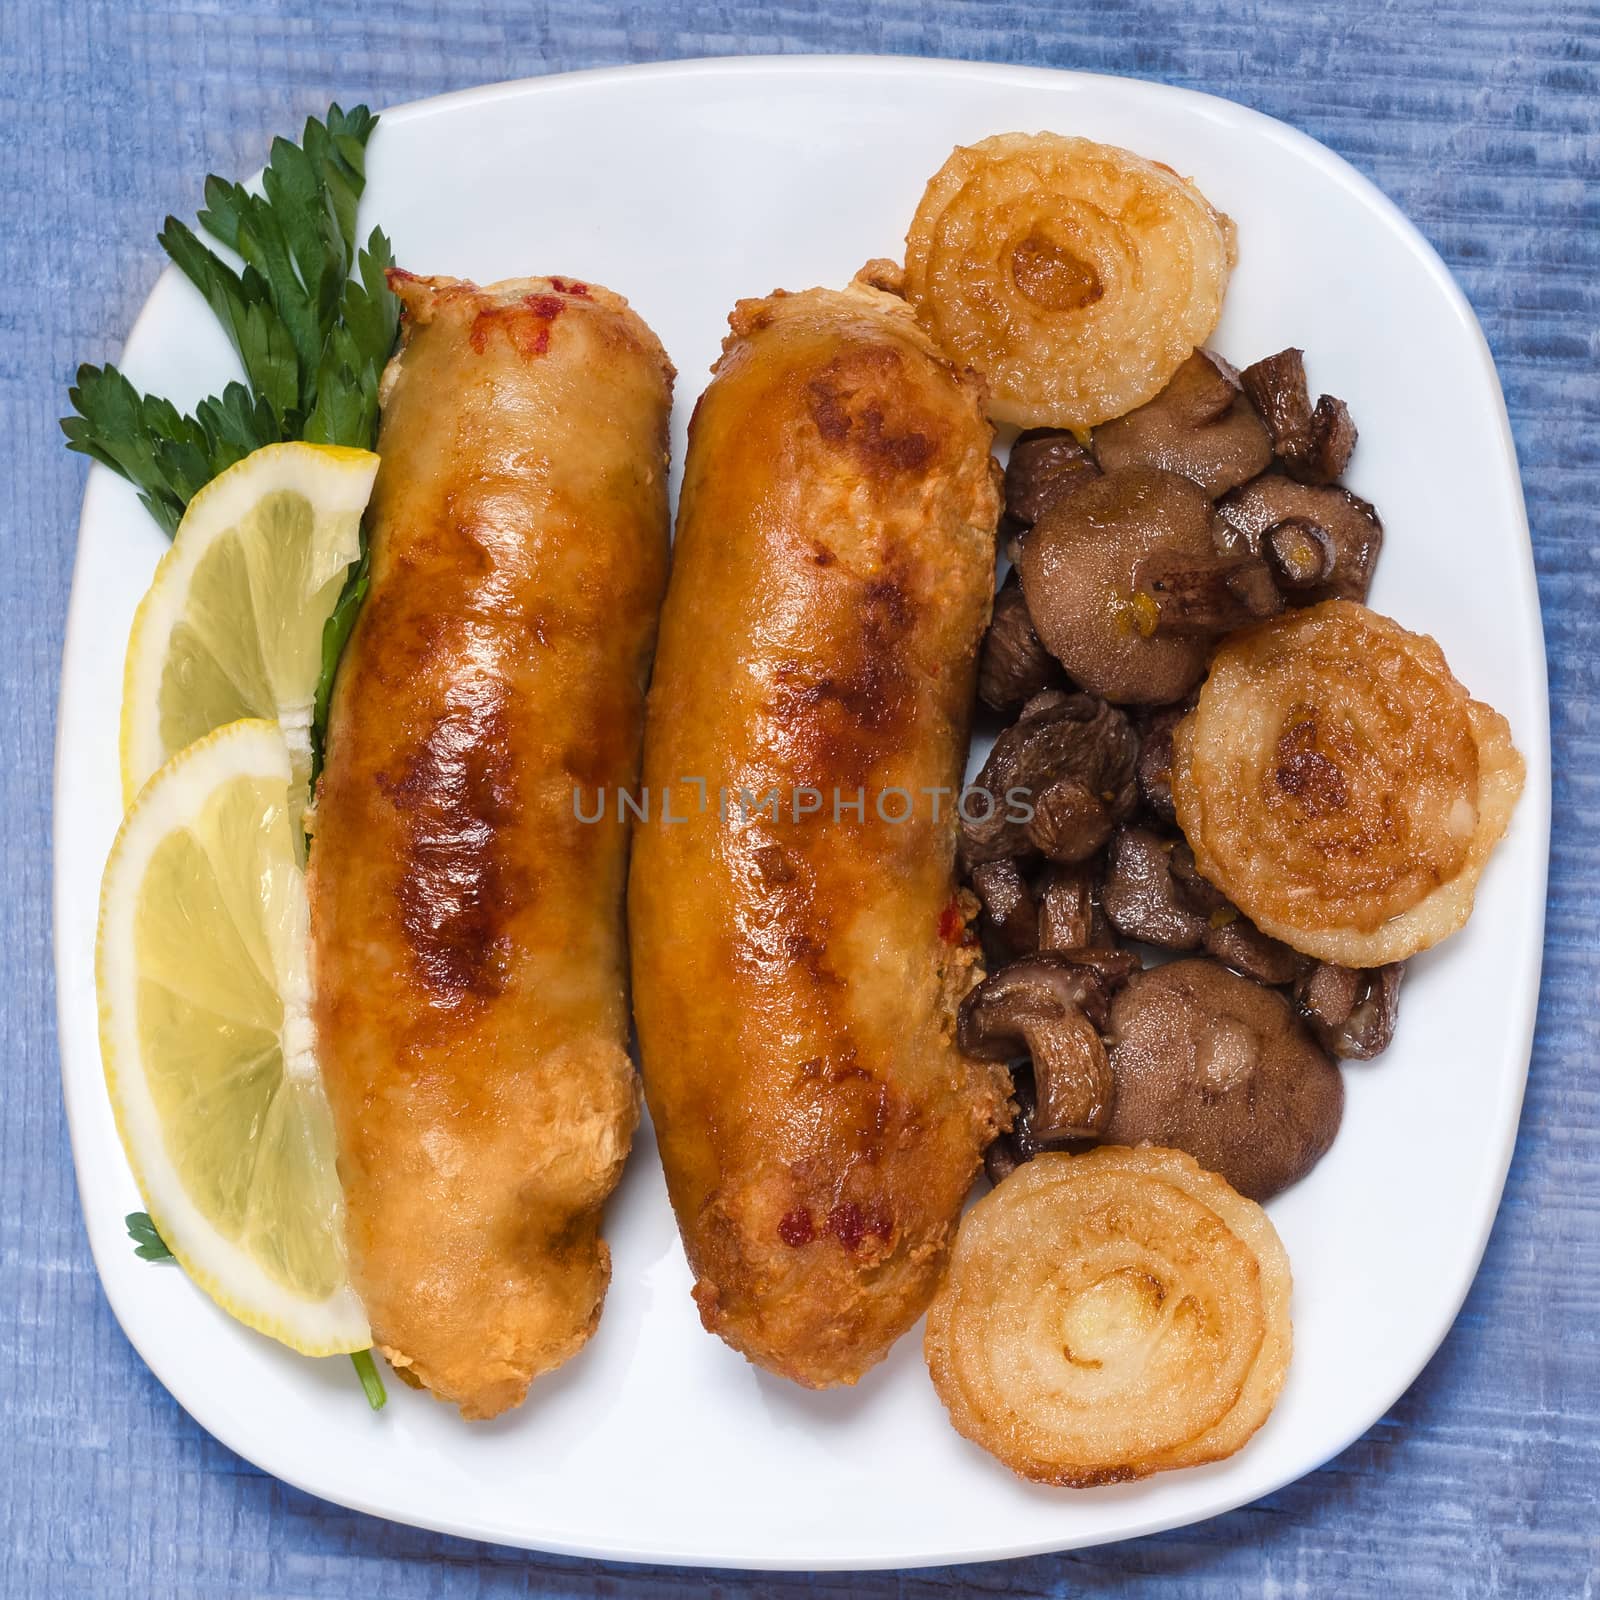 Fried sausage with mushrooms and onions. by Gaina